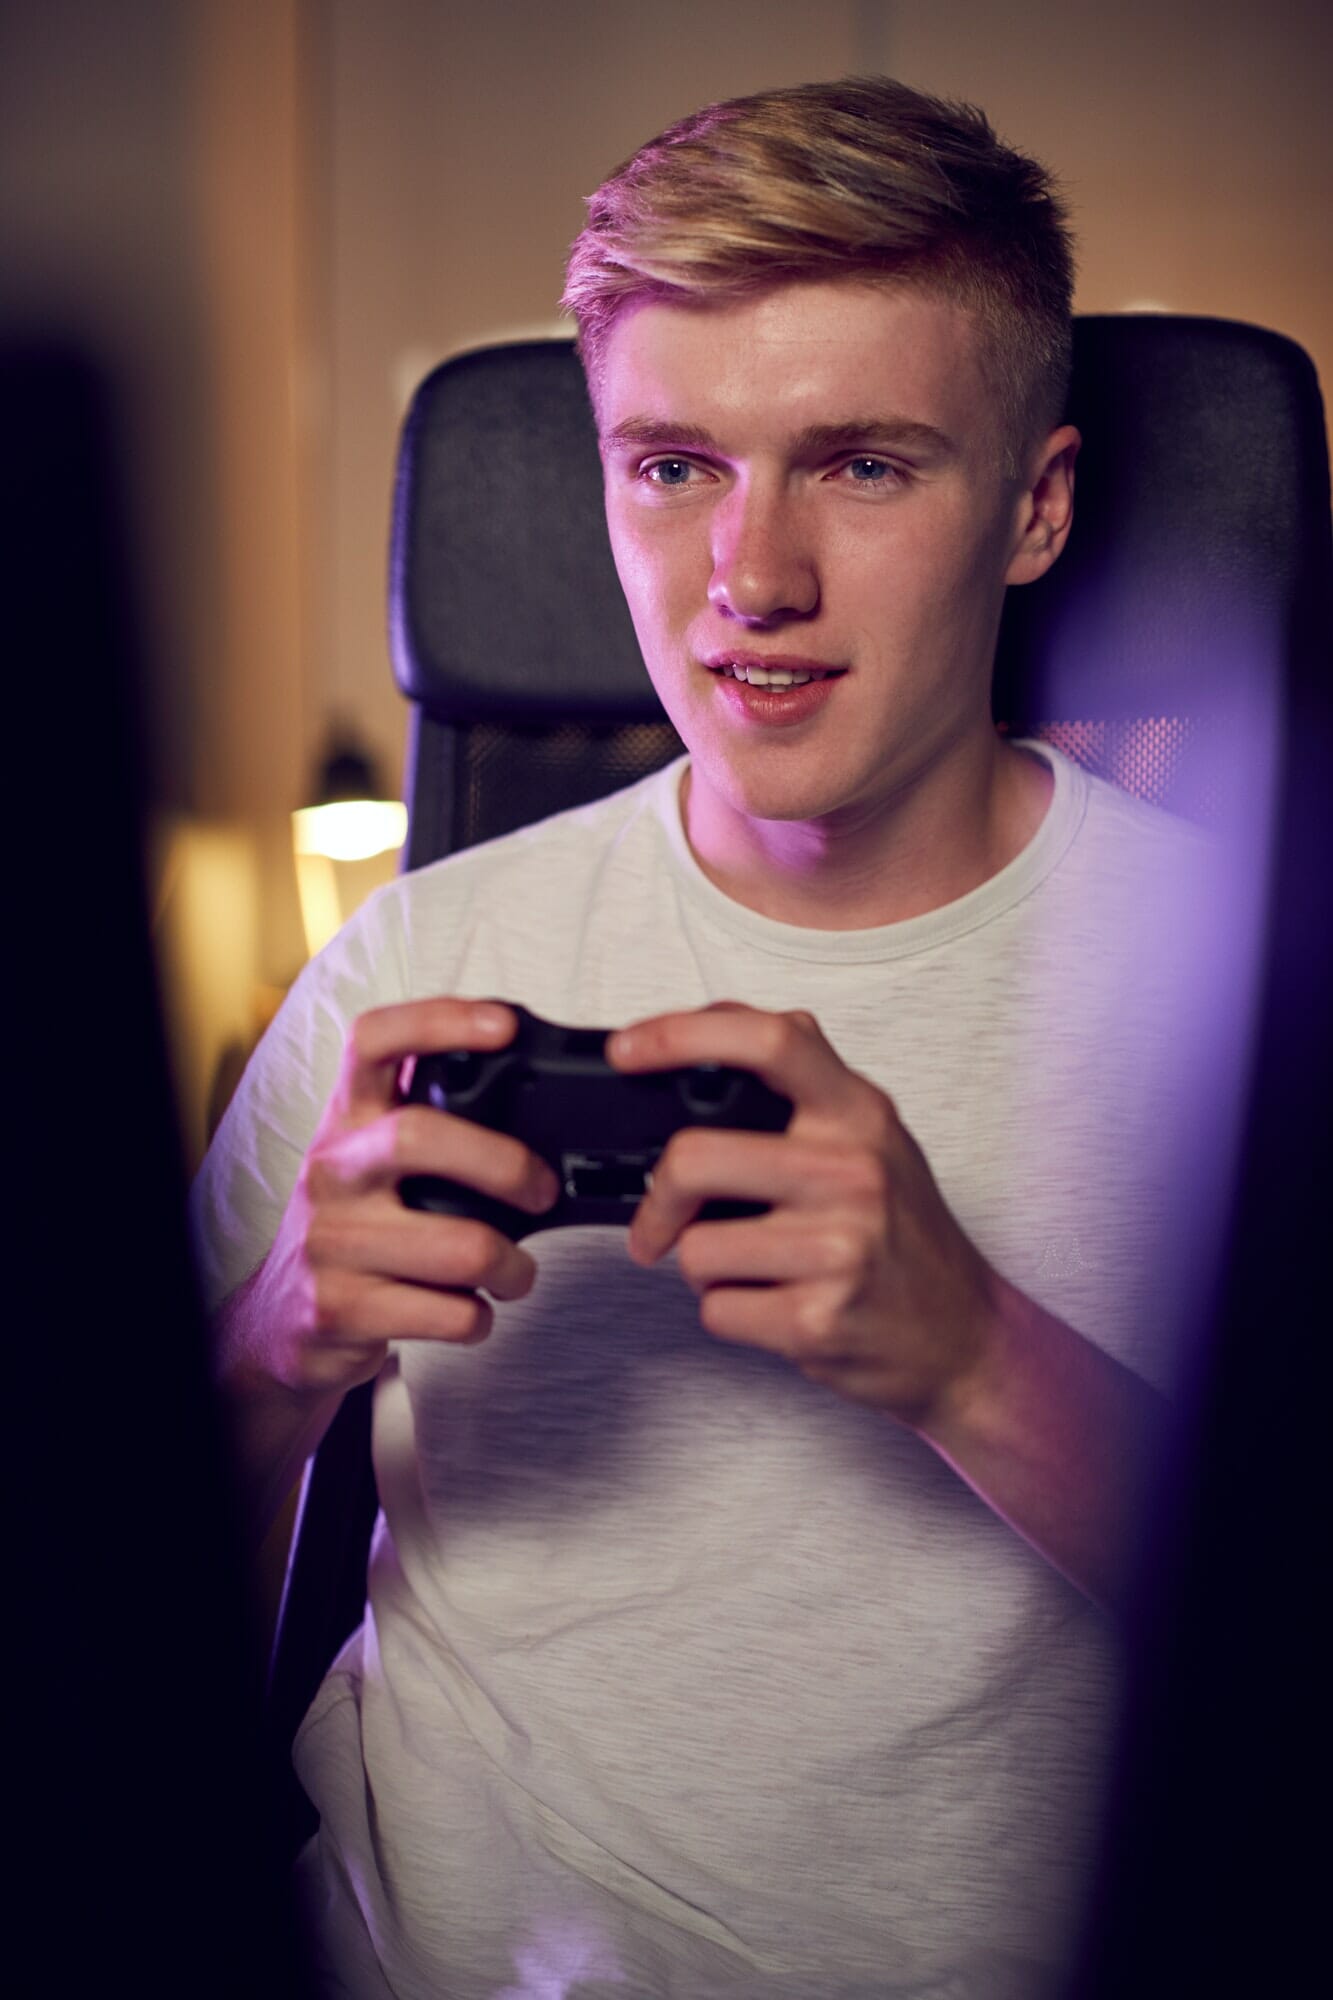 Teenage Boy With Game Pad Sitting In Chair and Gaming At Home